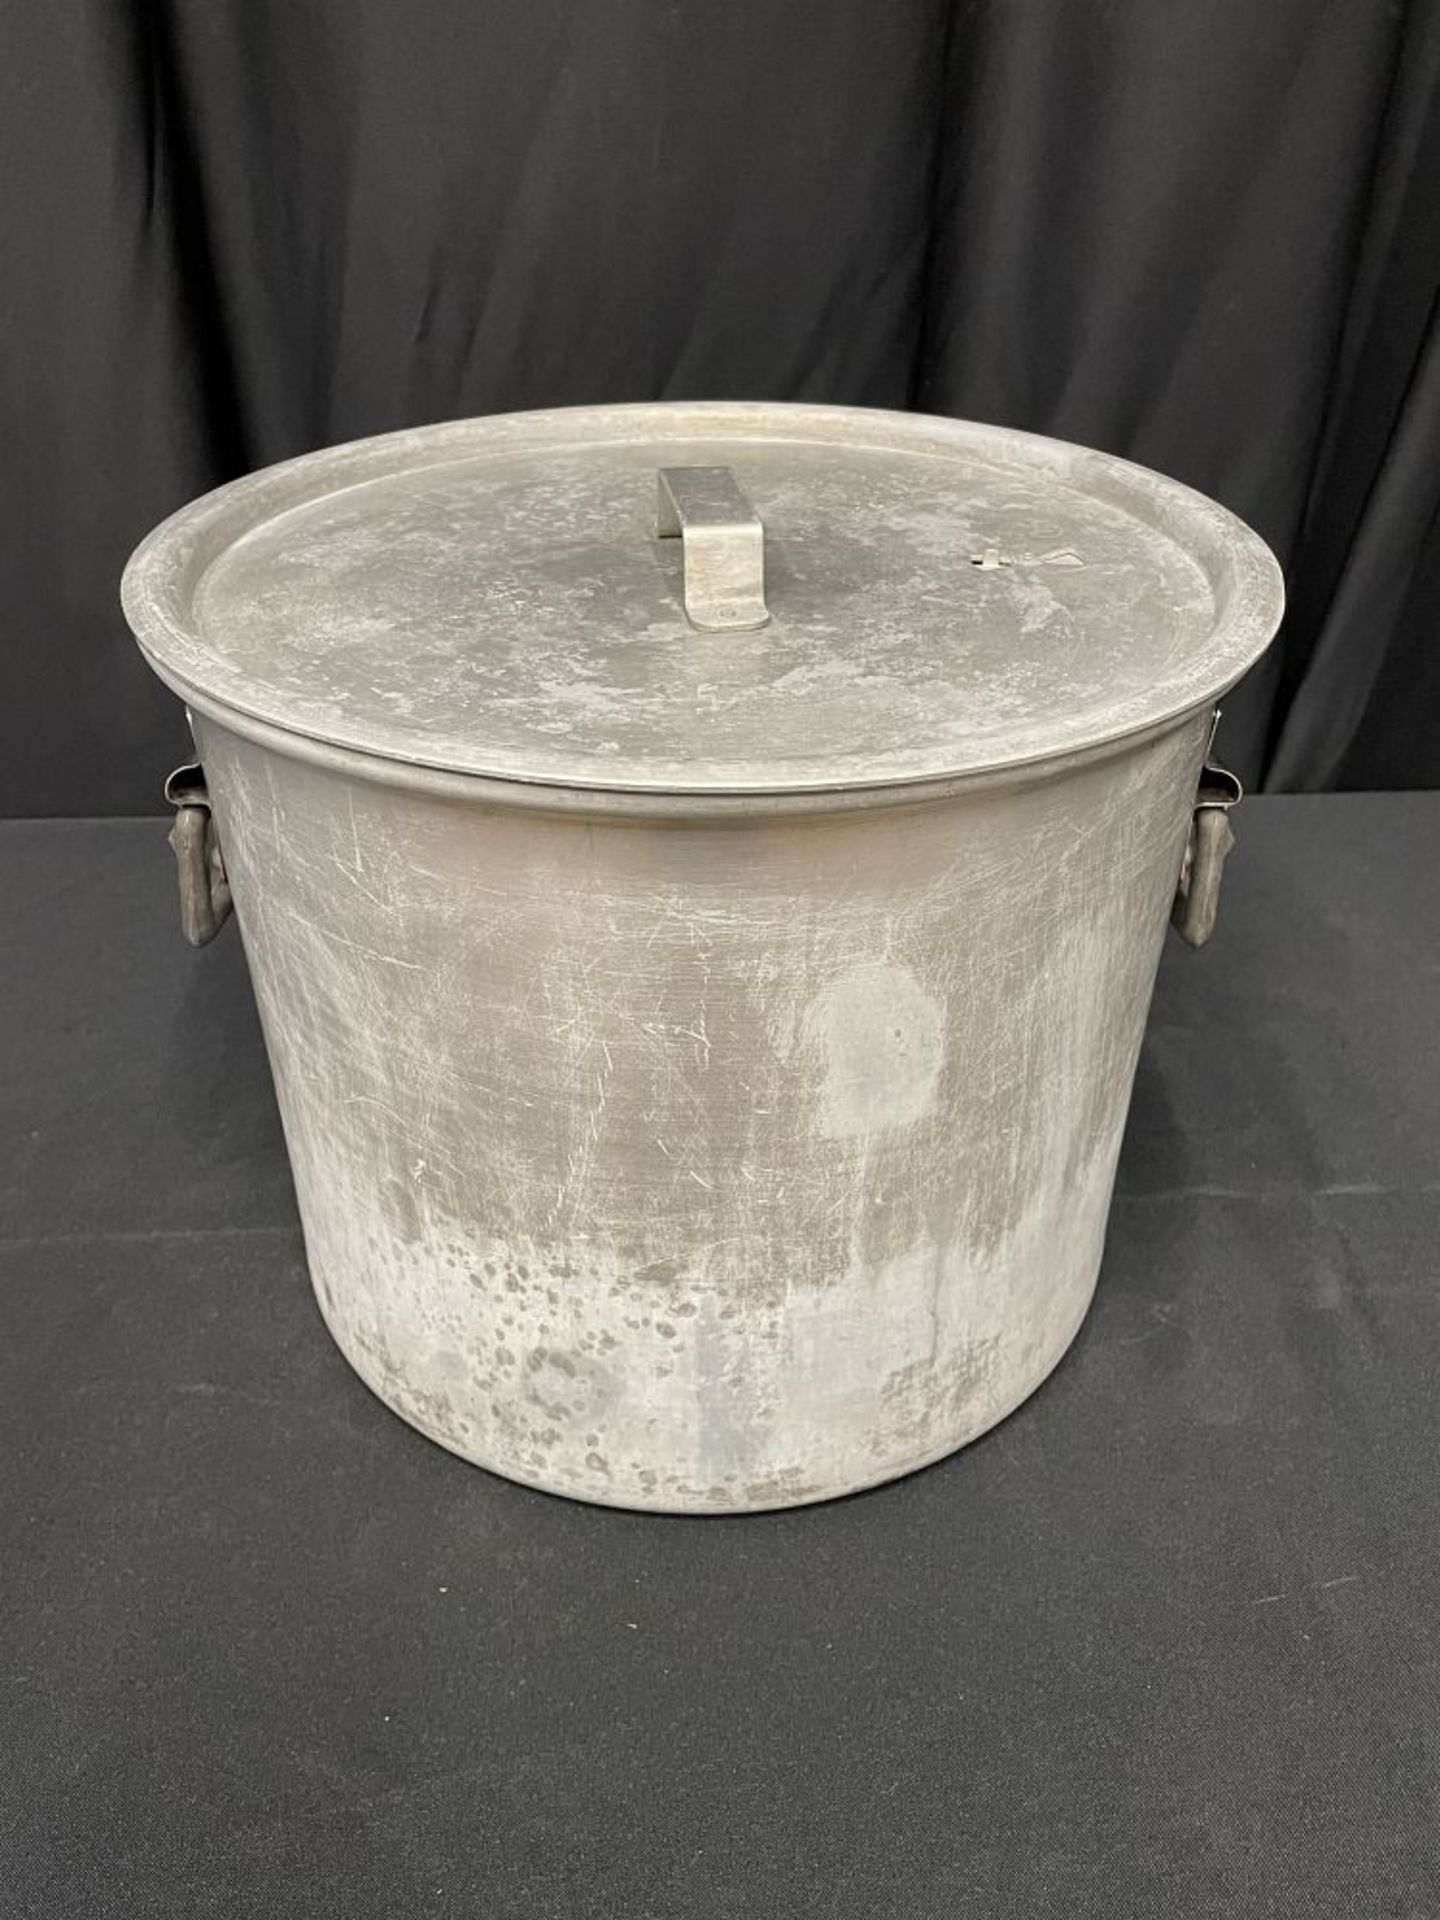 STOCKPOT WITH INNER BASKET